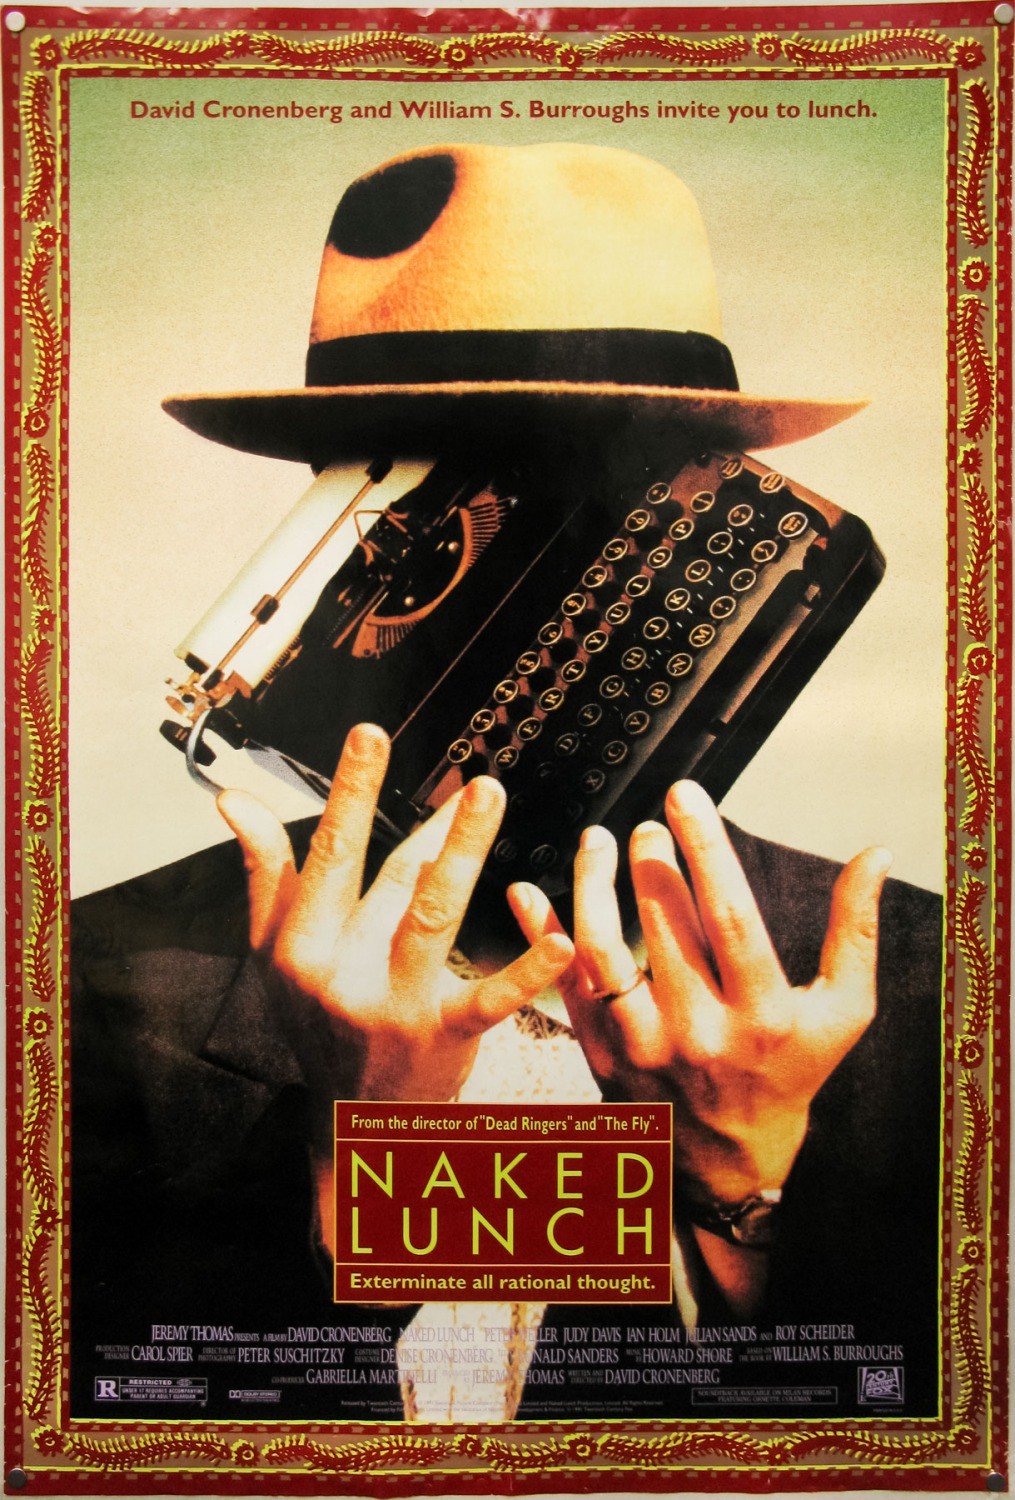 David Cronenberg's NAKED LUNCH in 35mm